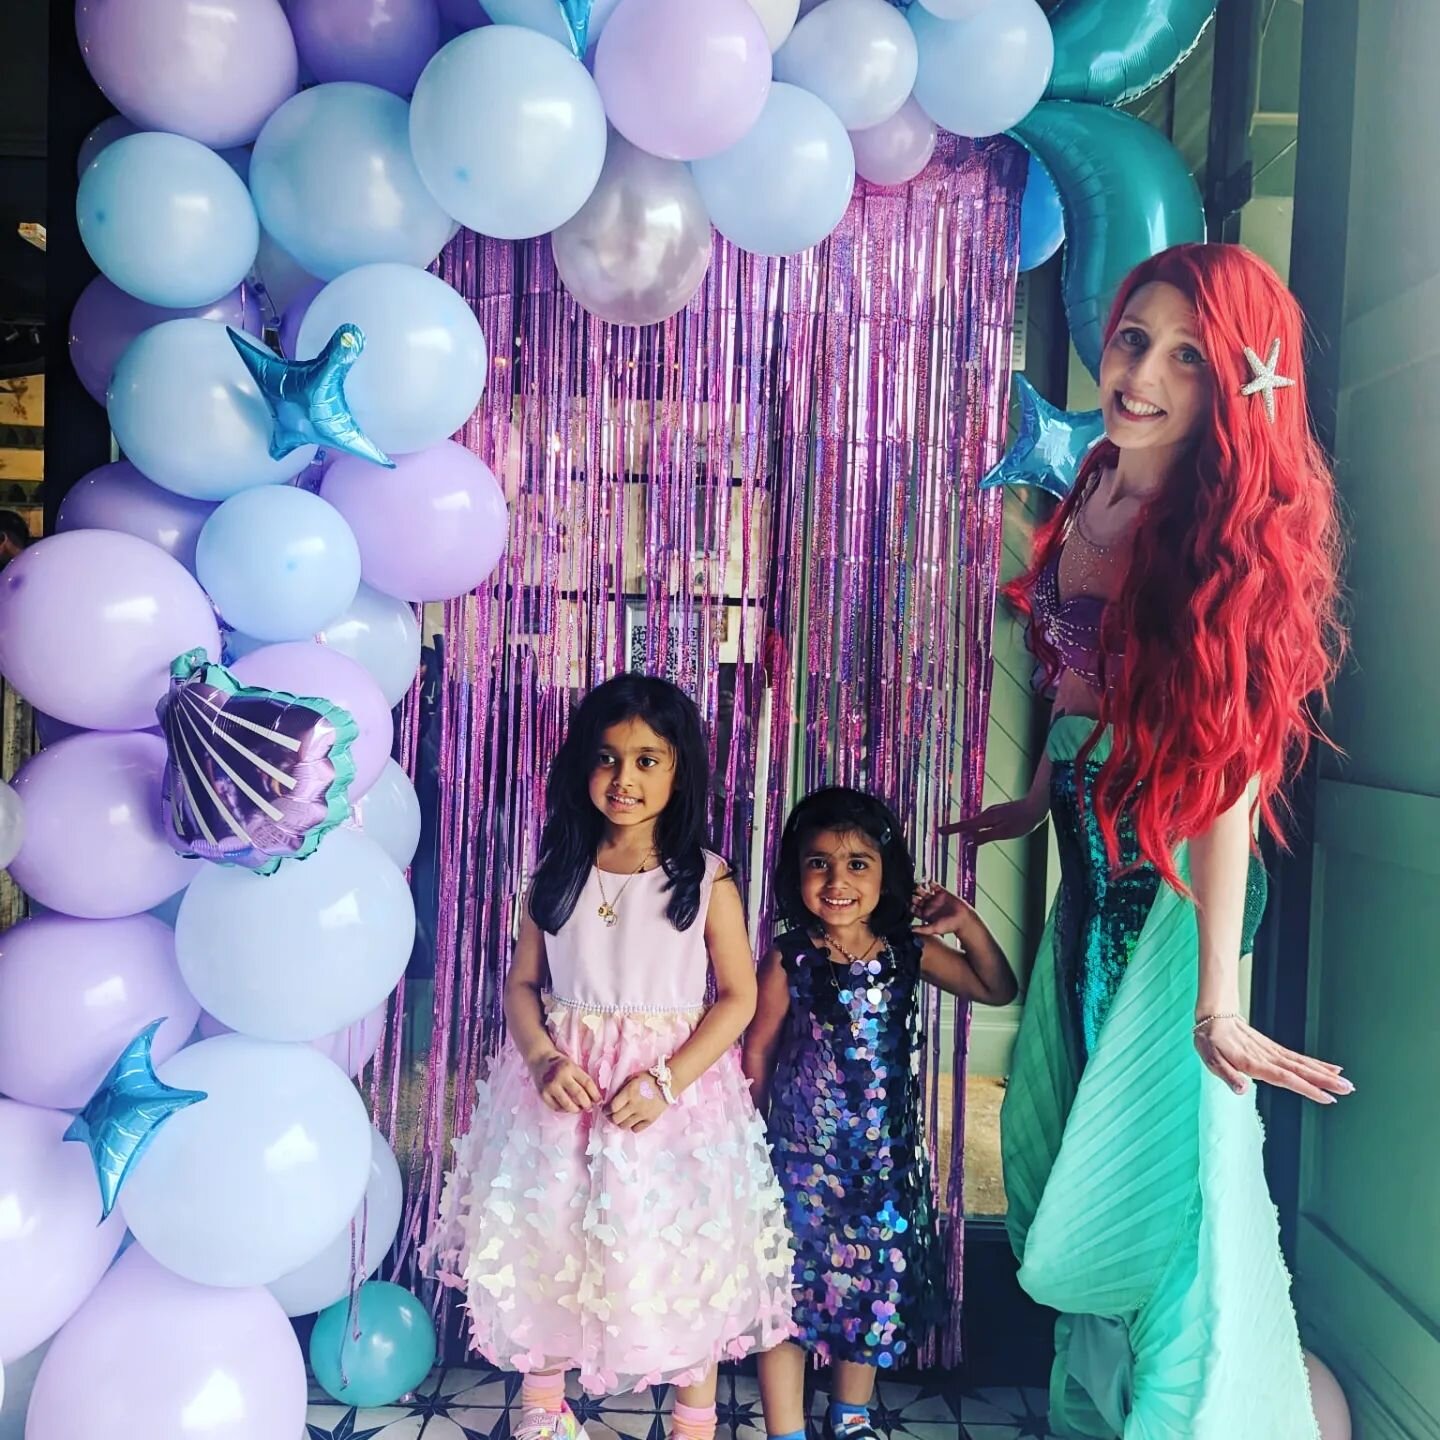 This was a mermazing party with lots of princess sparkle and starfish wishes! 

#mermaidparty #mermaidpartyideas #mermaidparties #princessparty #princesspartyideas #princessparties #childrensentertainment #childrenentertainer #childrensparty